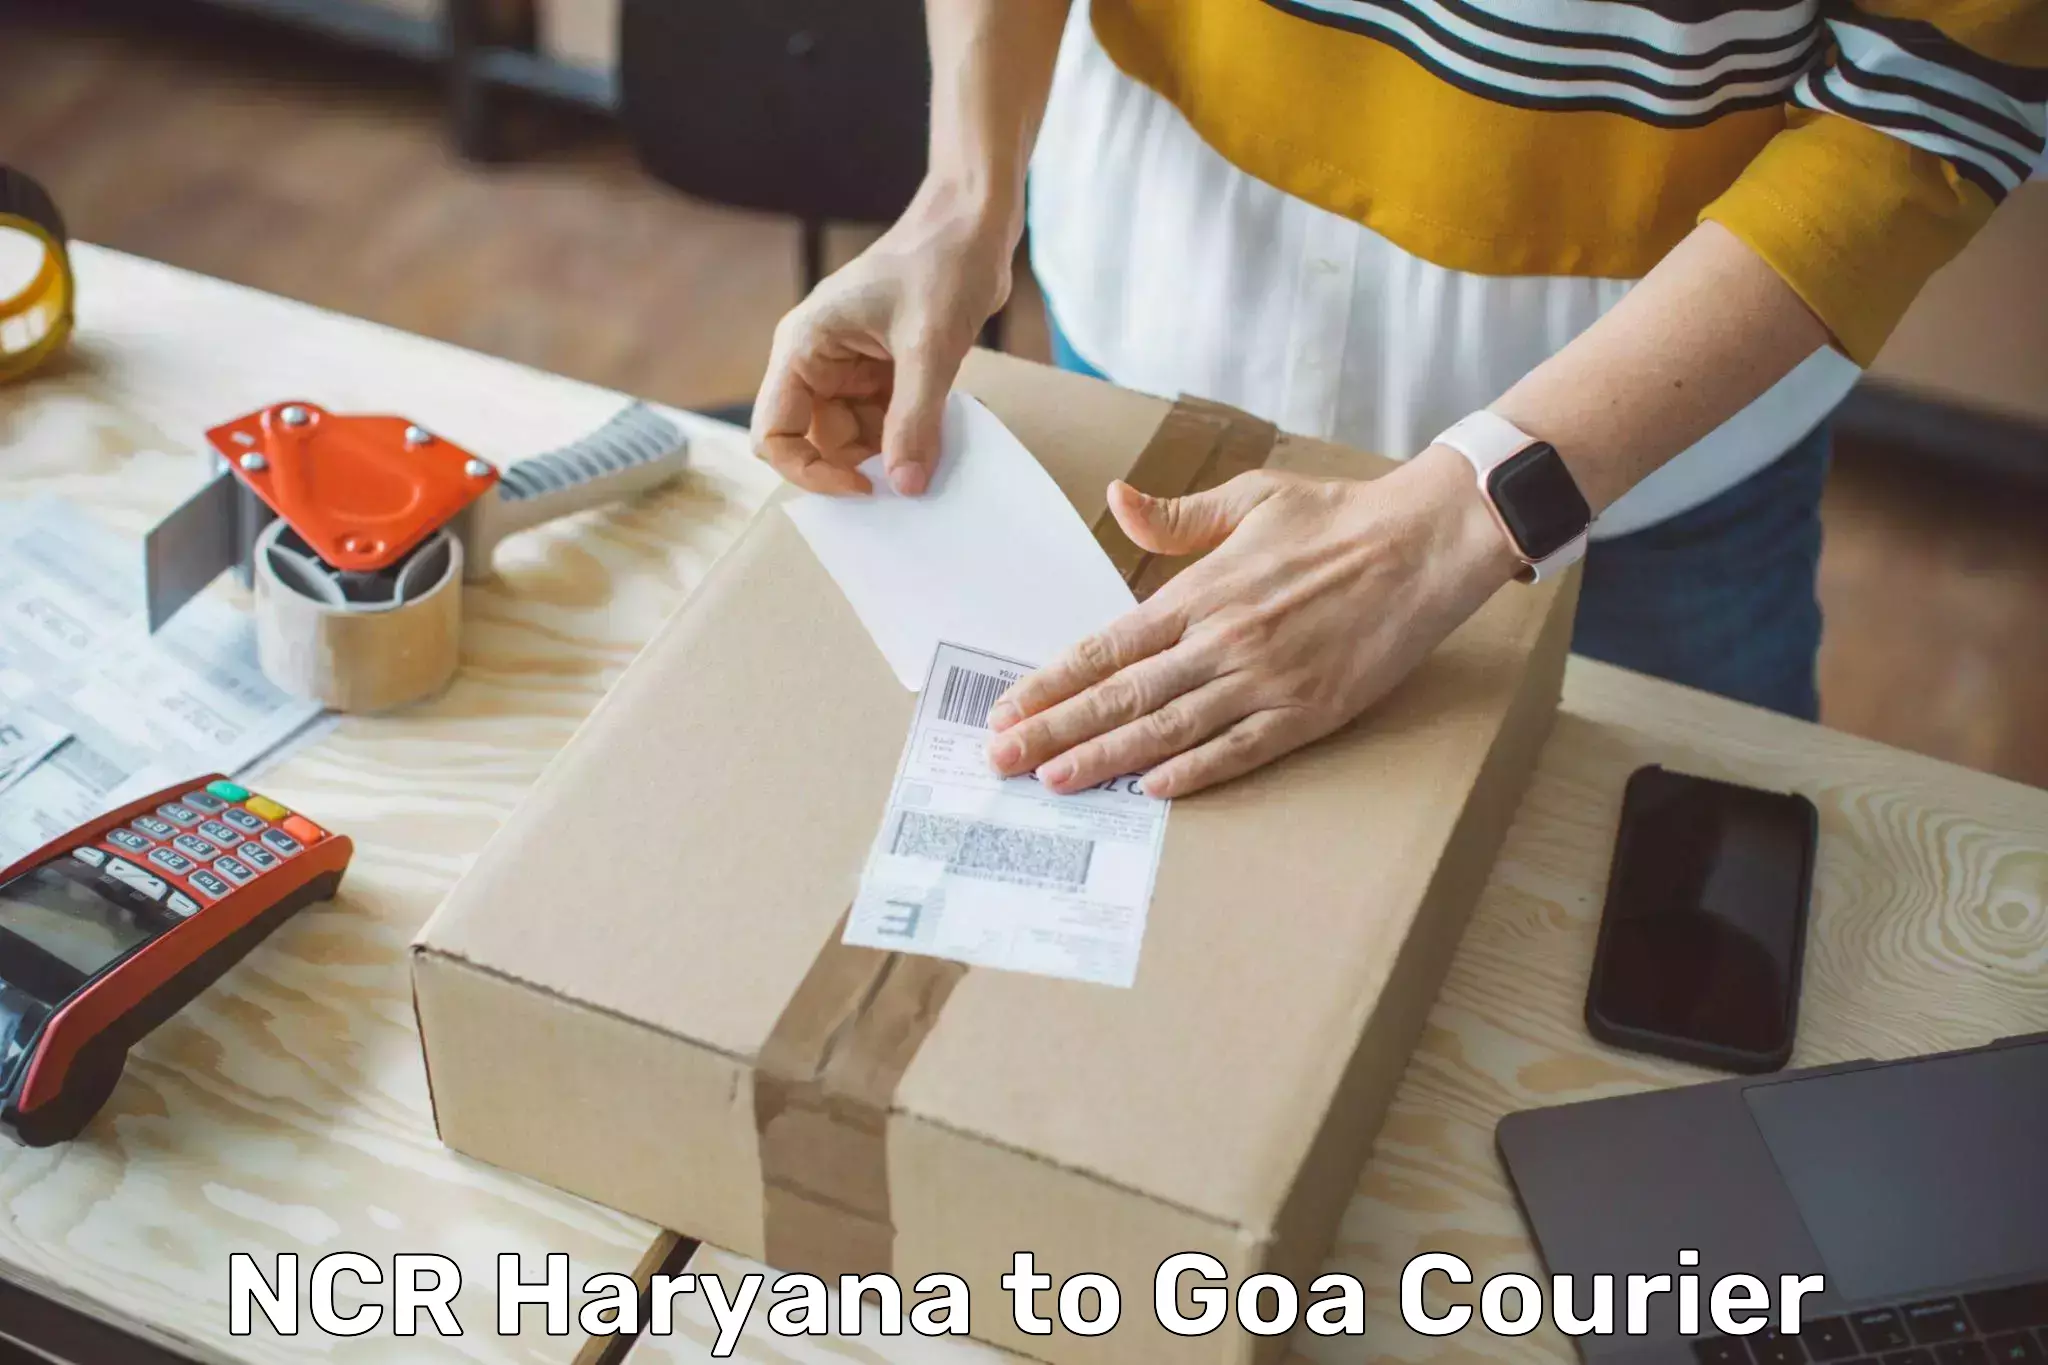 Reliable delivery network NCR Haryana to South Goa